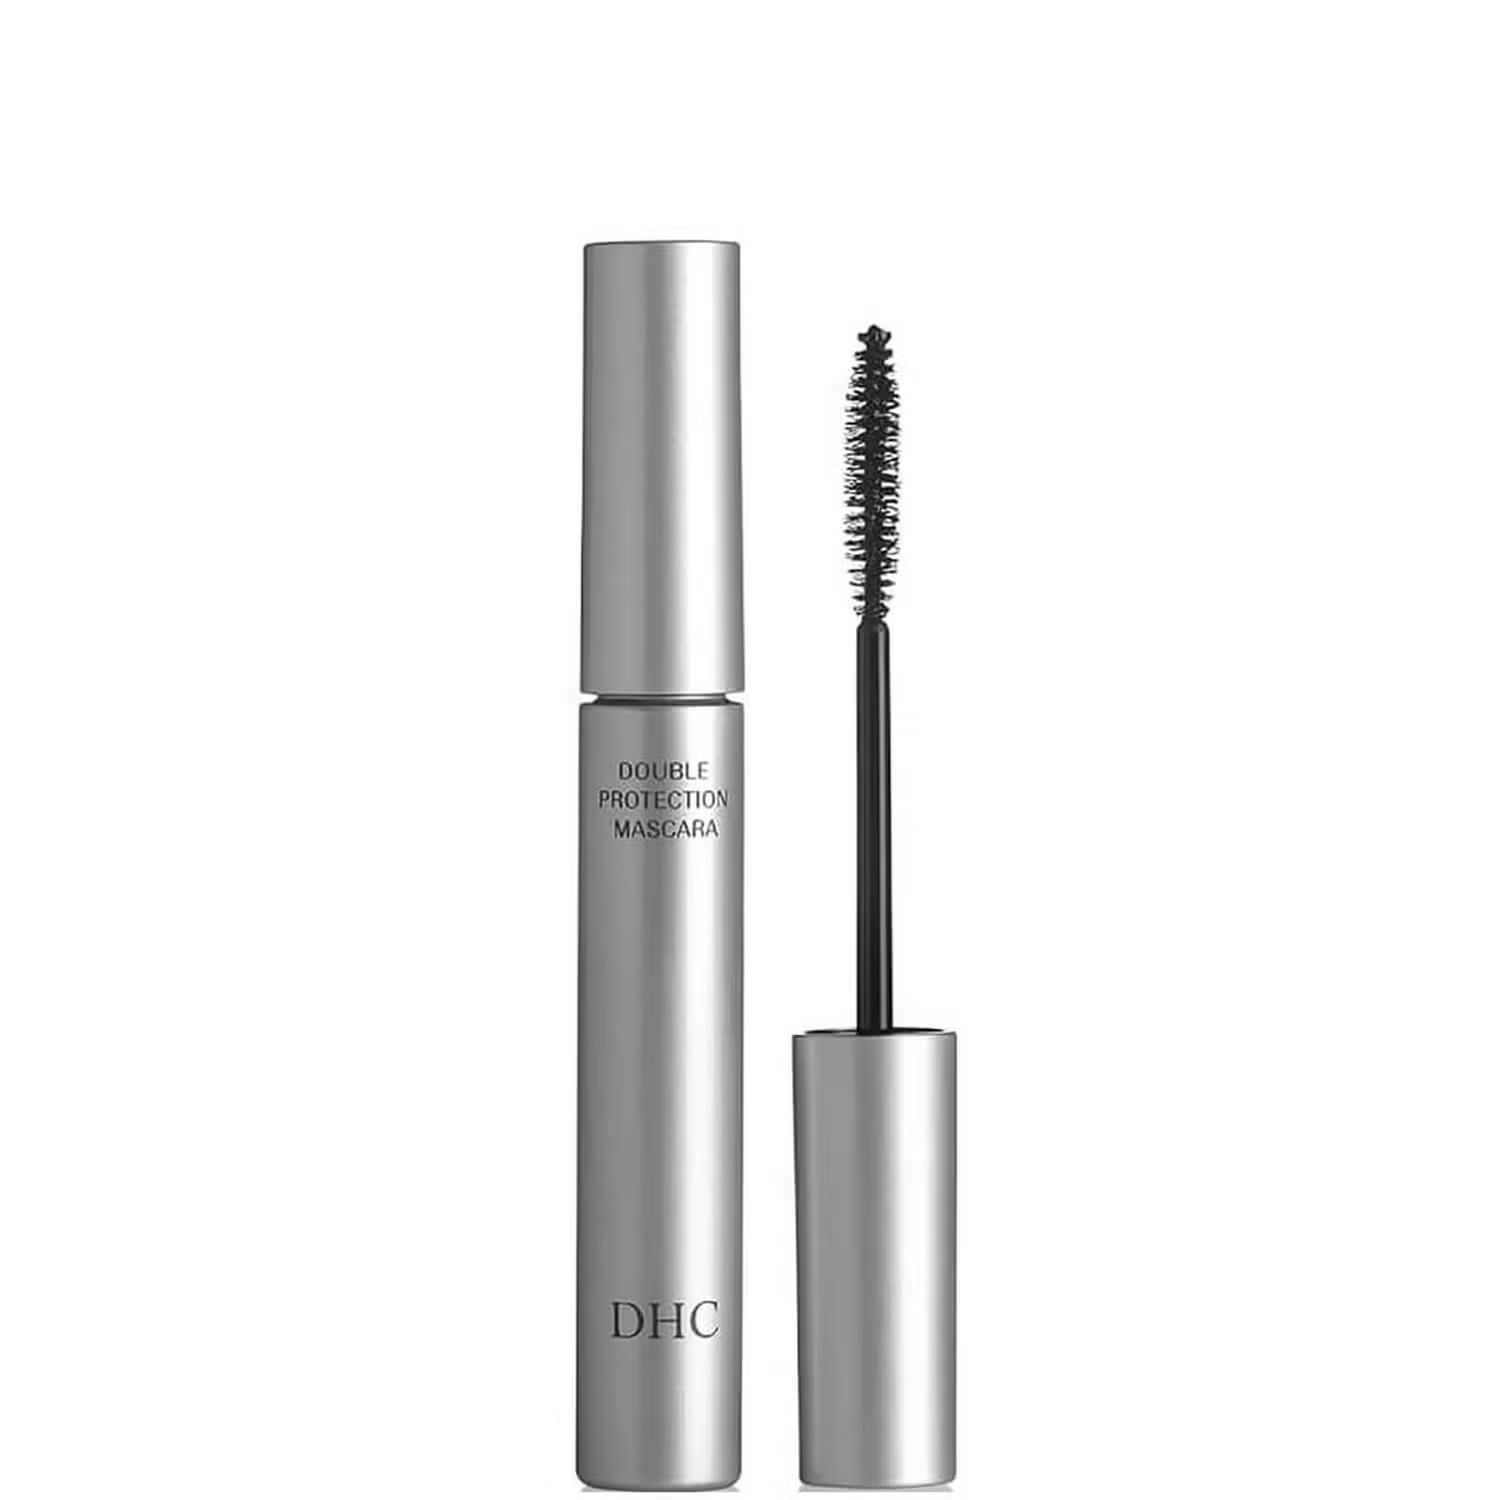 DHC Mascara Perfect Pro Double Protection - Black (0.17 oz.) | Dermstore (US)